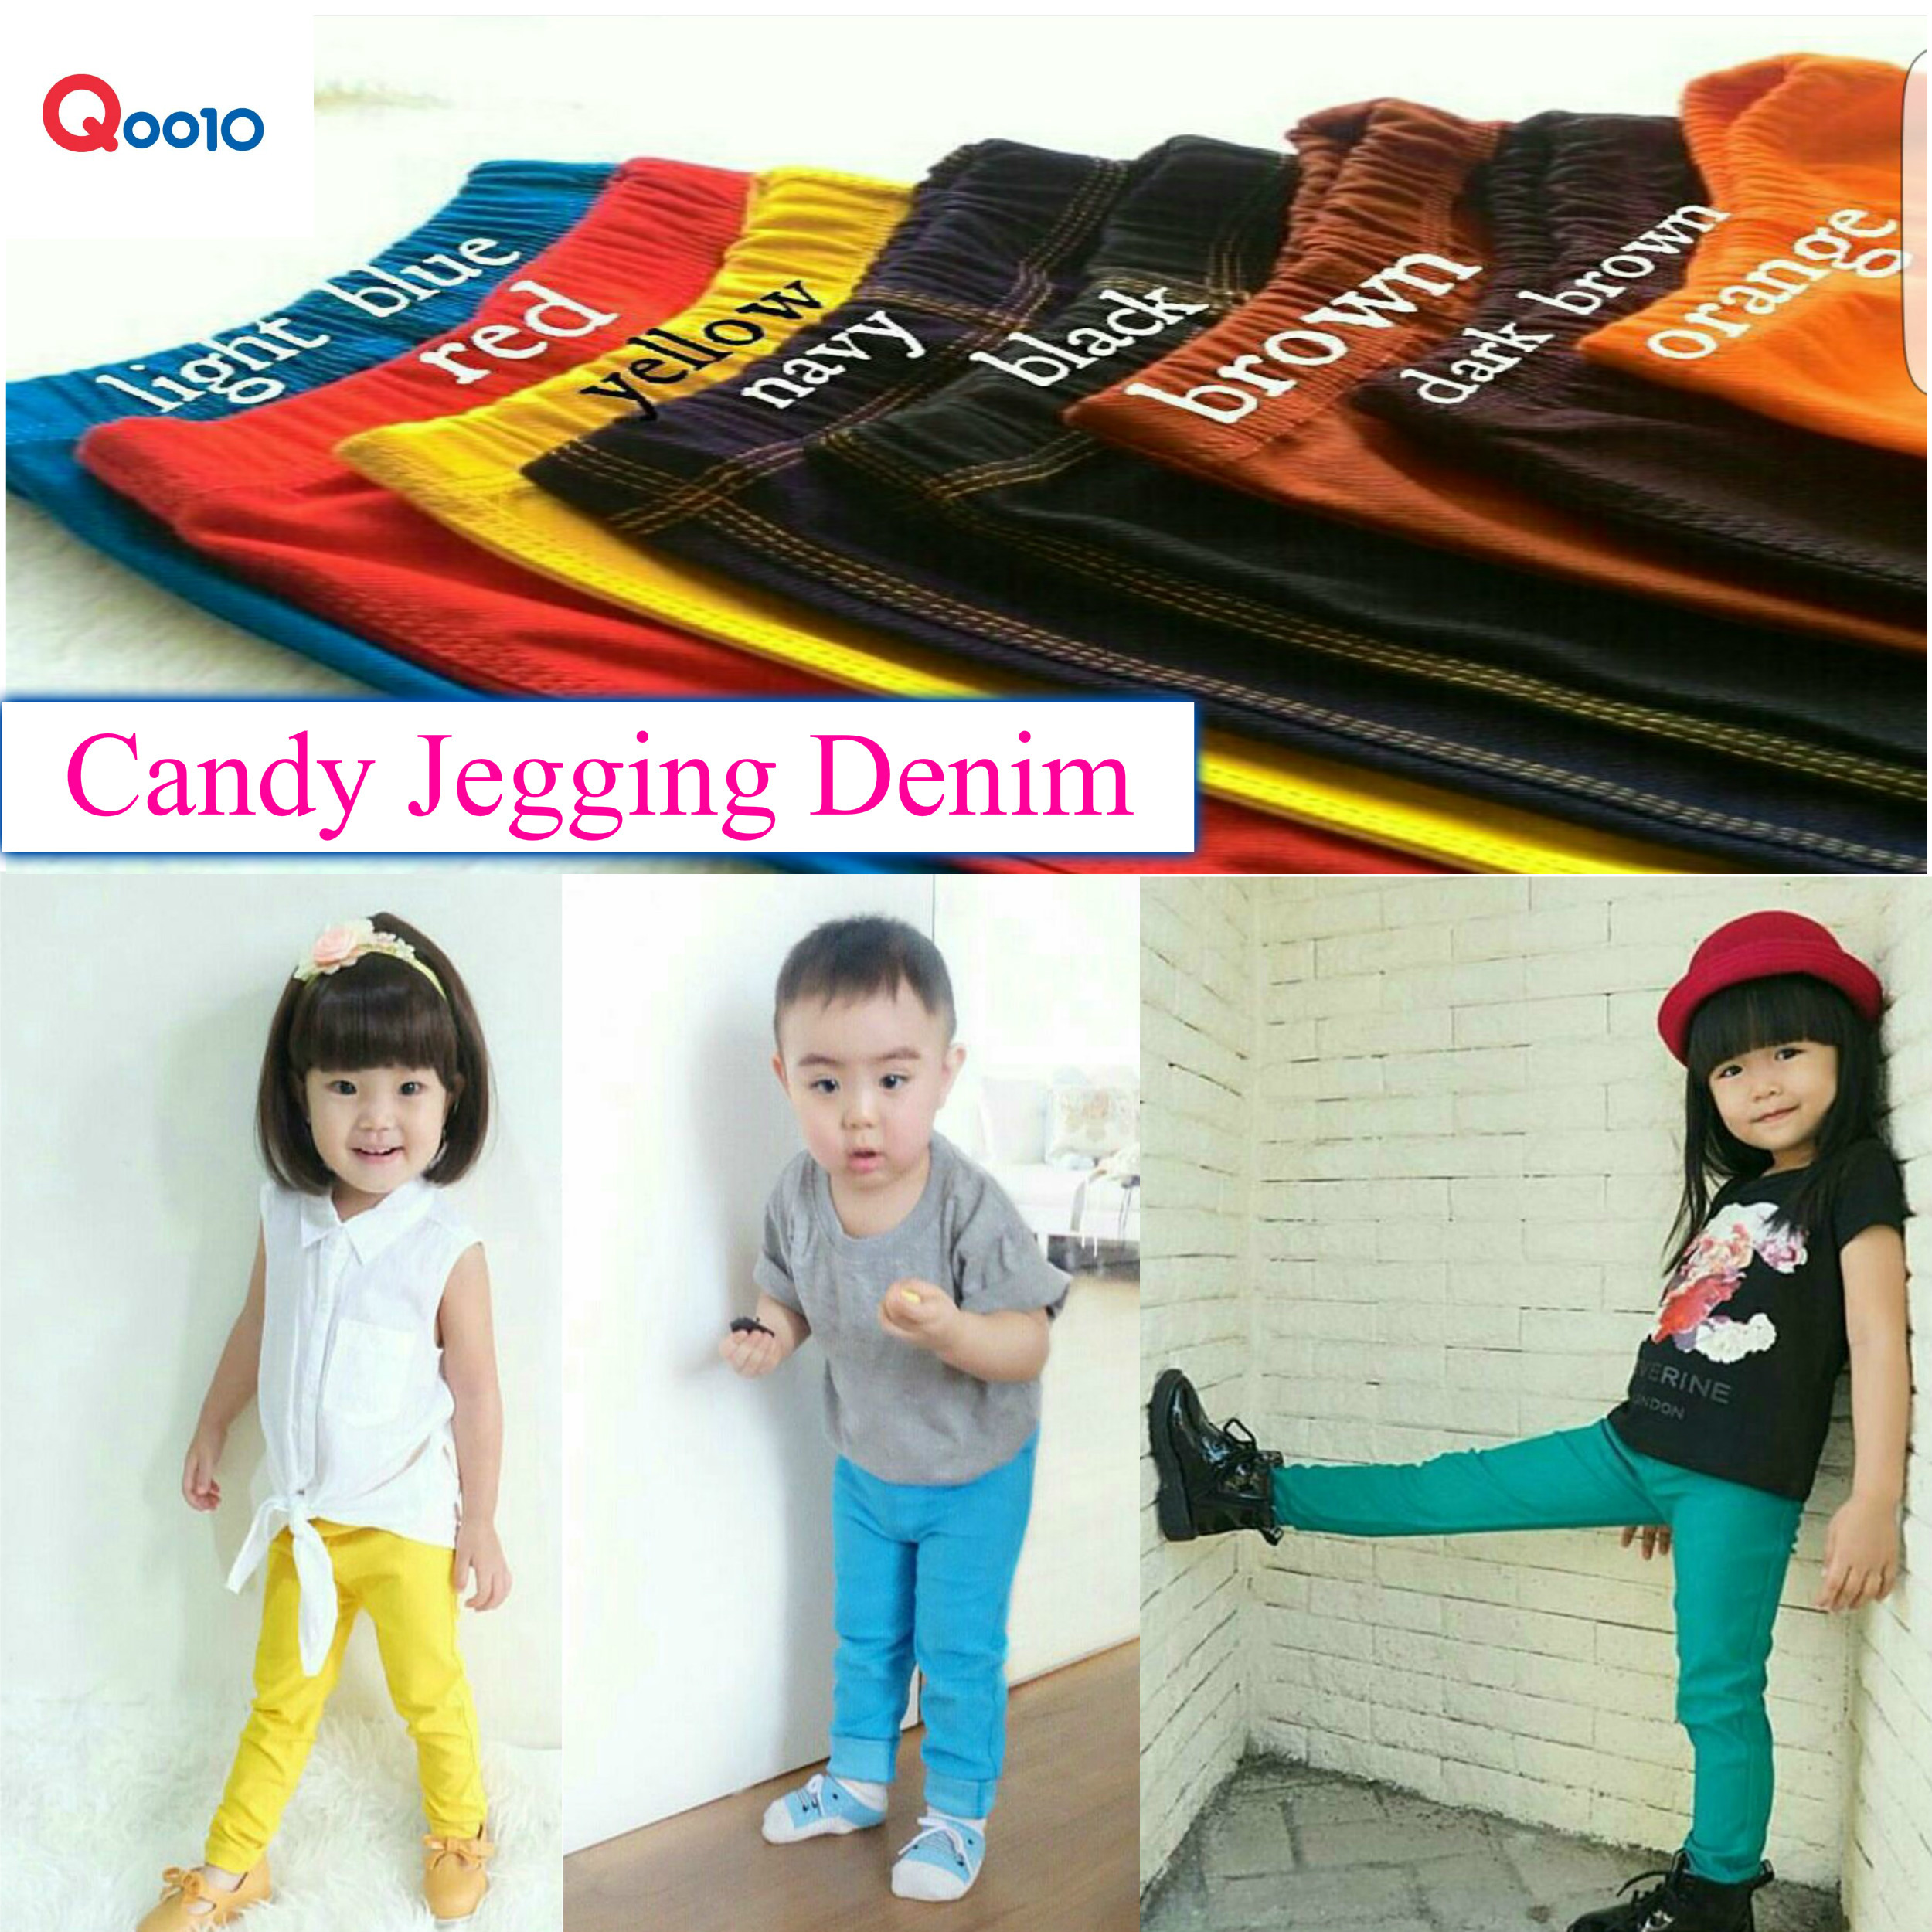 soft jeans for kids